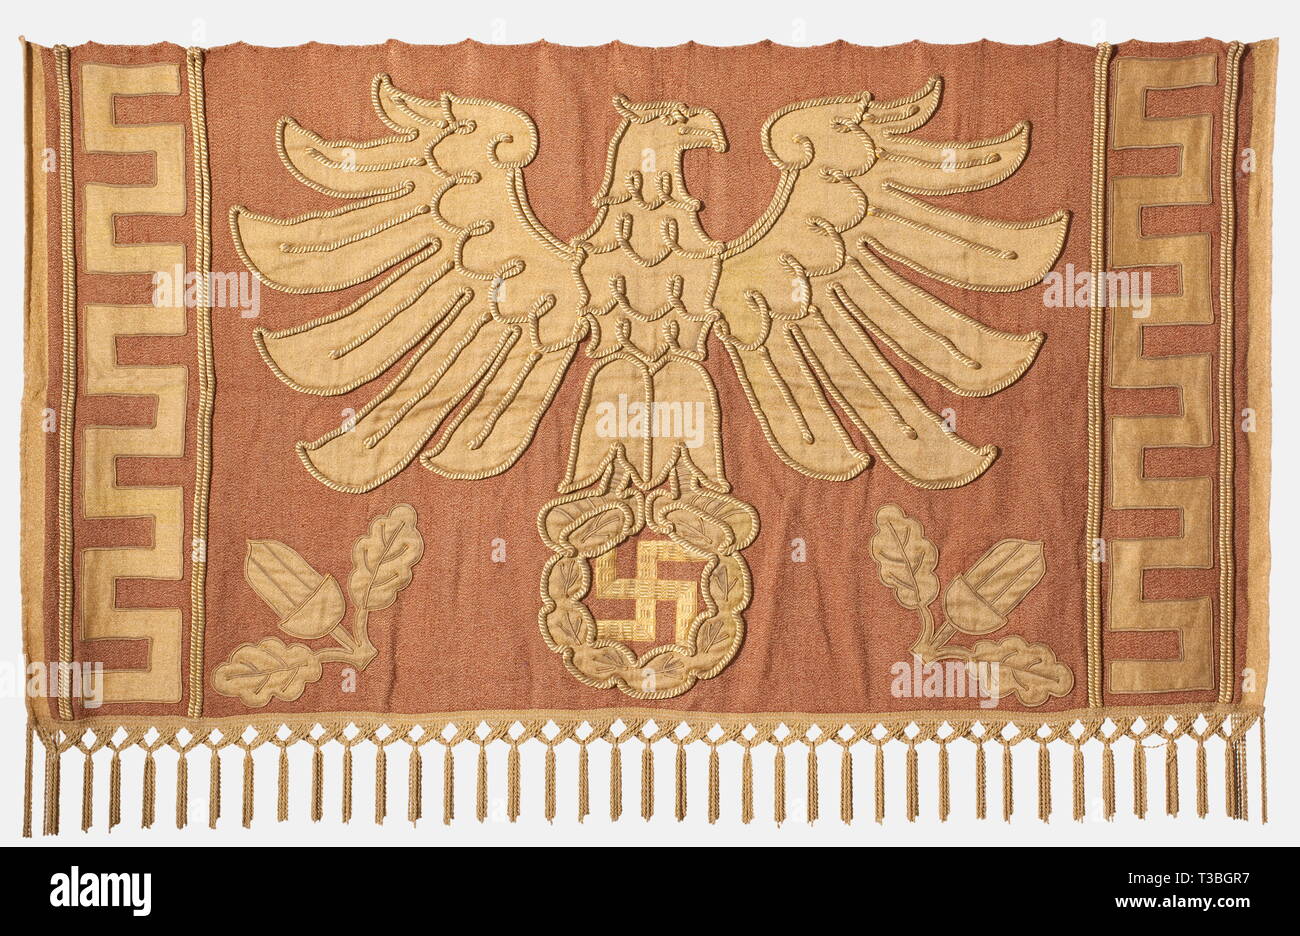 A decorative hanging for a parade float, in the procession '2000 Years of German Culture' in Munich 1938 Heavy cotton interwoven with gold and bearing an applied, gold coloured national eagle emblem outlined with gold cord on an oak leaf wreath. The swastika applied with gold braid, meander bordering on the sides. Forged iron suspension rings probably of later date. 130 x 215 cm. Probably a parade float banner of the 'Neue Zeit' ('New Era'). Cf. other decorative hangings of this kind in '2000 Jahre Deutsche Kultur', Bayerland Verlag, Munich 1938, p. 31 and in 'Festtage in M, Editorial-Use-Only Stock Photo